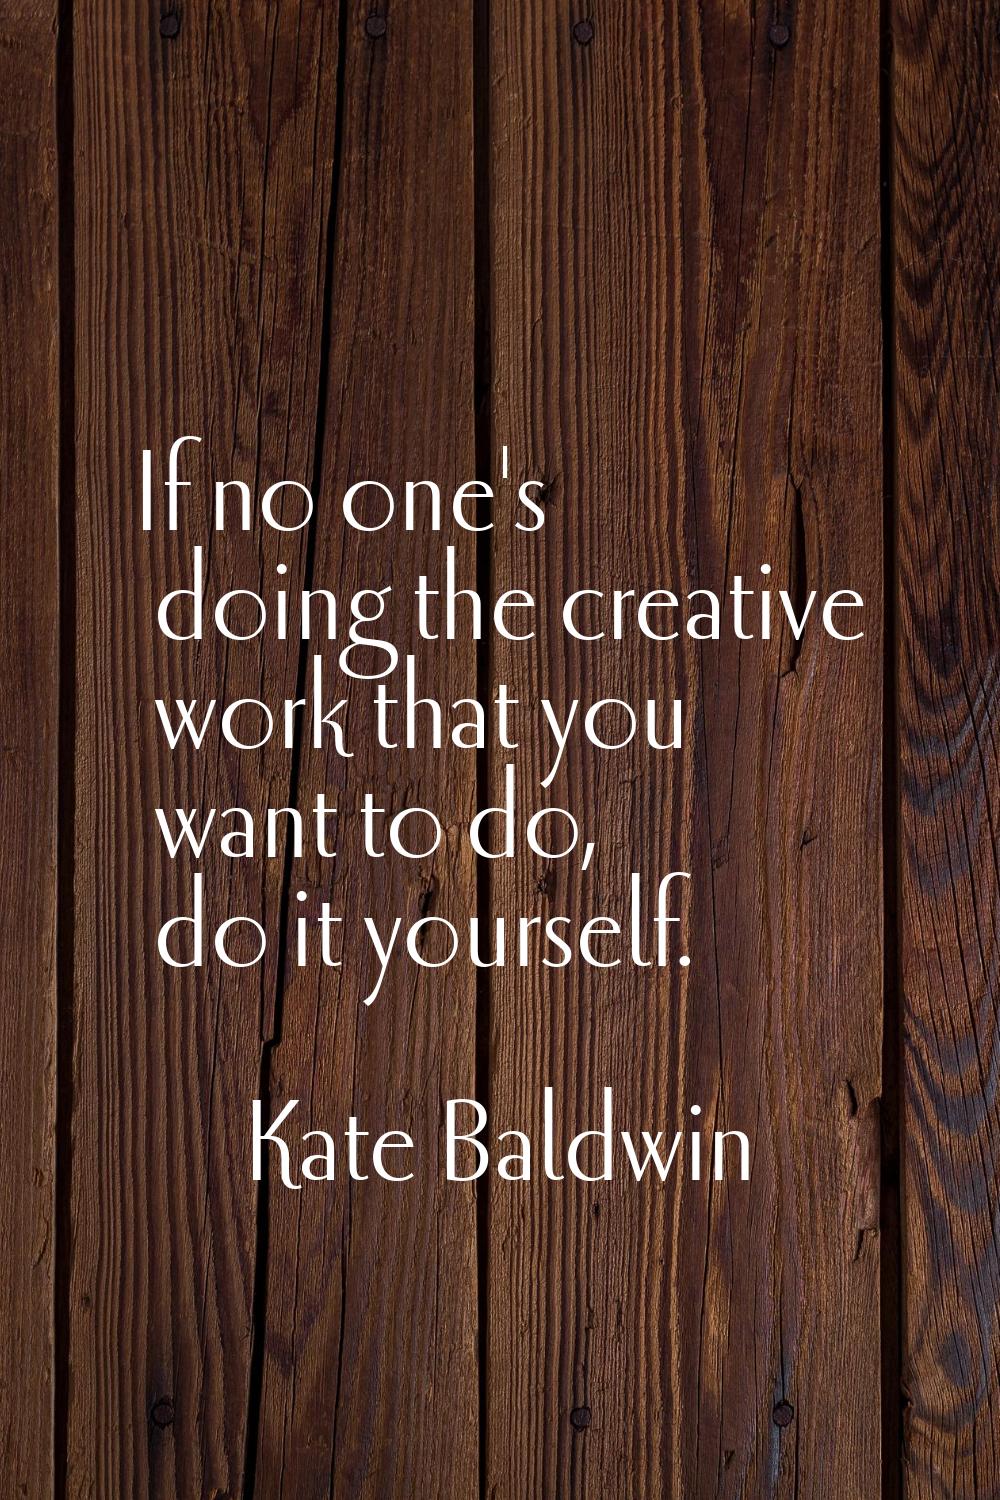 If no one's doing the creative work that you want to do, do it yourself.